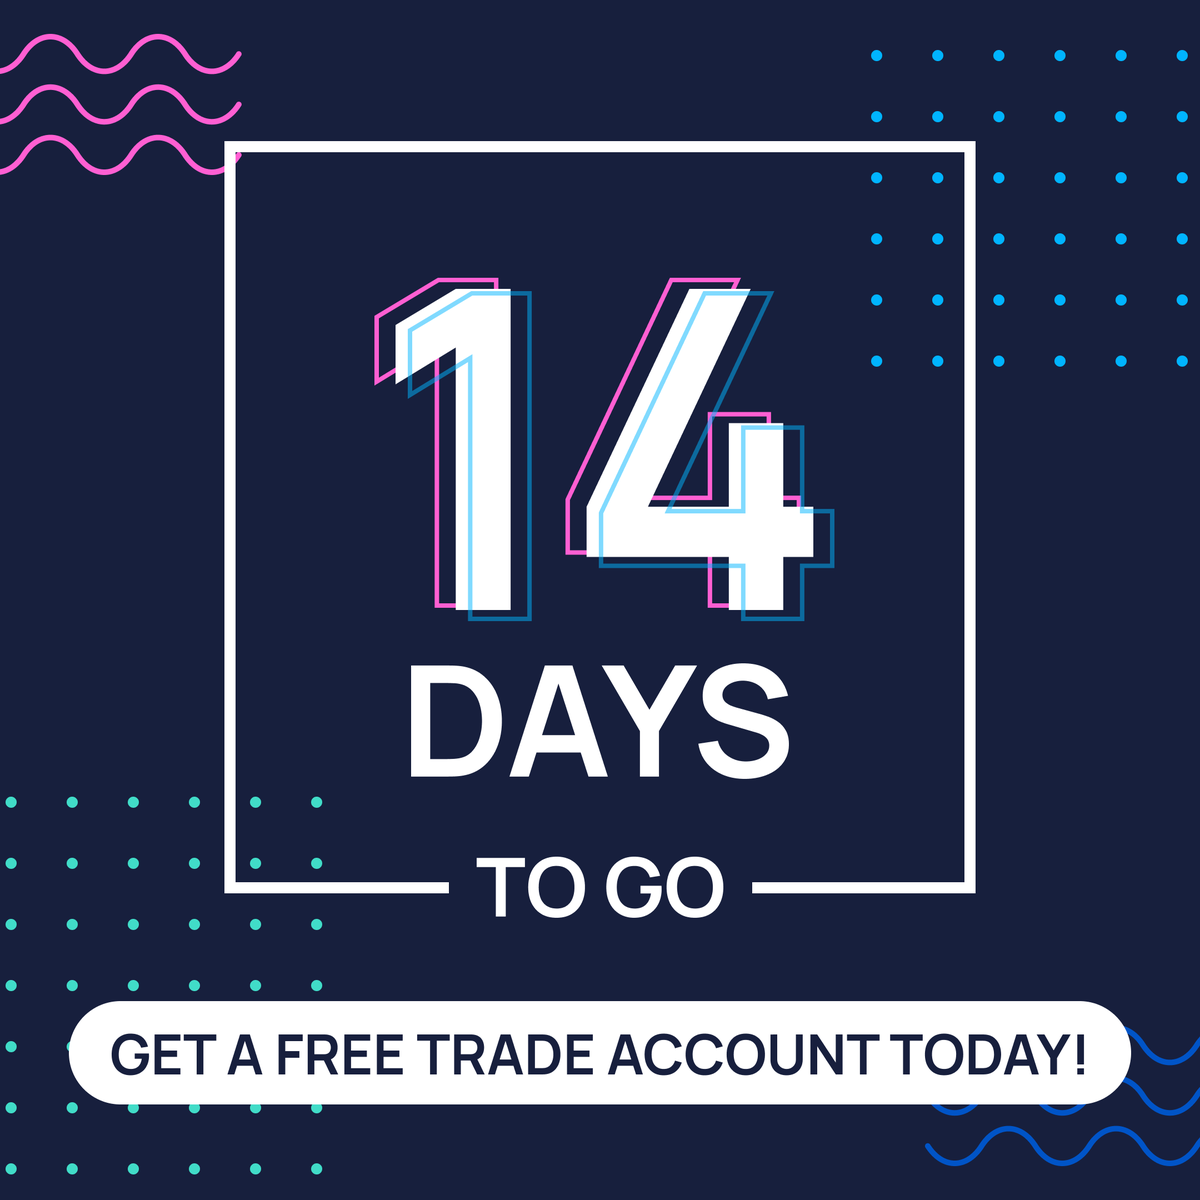 The countdown is on! Have you got your FREE Trade account and key fob ready for our changes on December 12th? #spotlesswater #purewater #windowcleaning #cardetailing #carvaleting #solarpanel #aquarium #cleaning